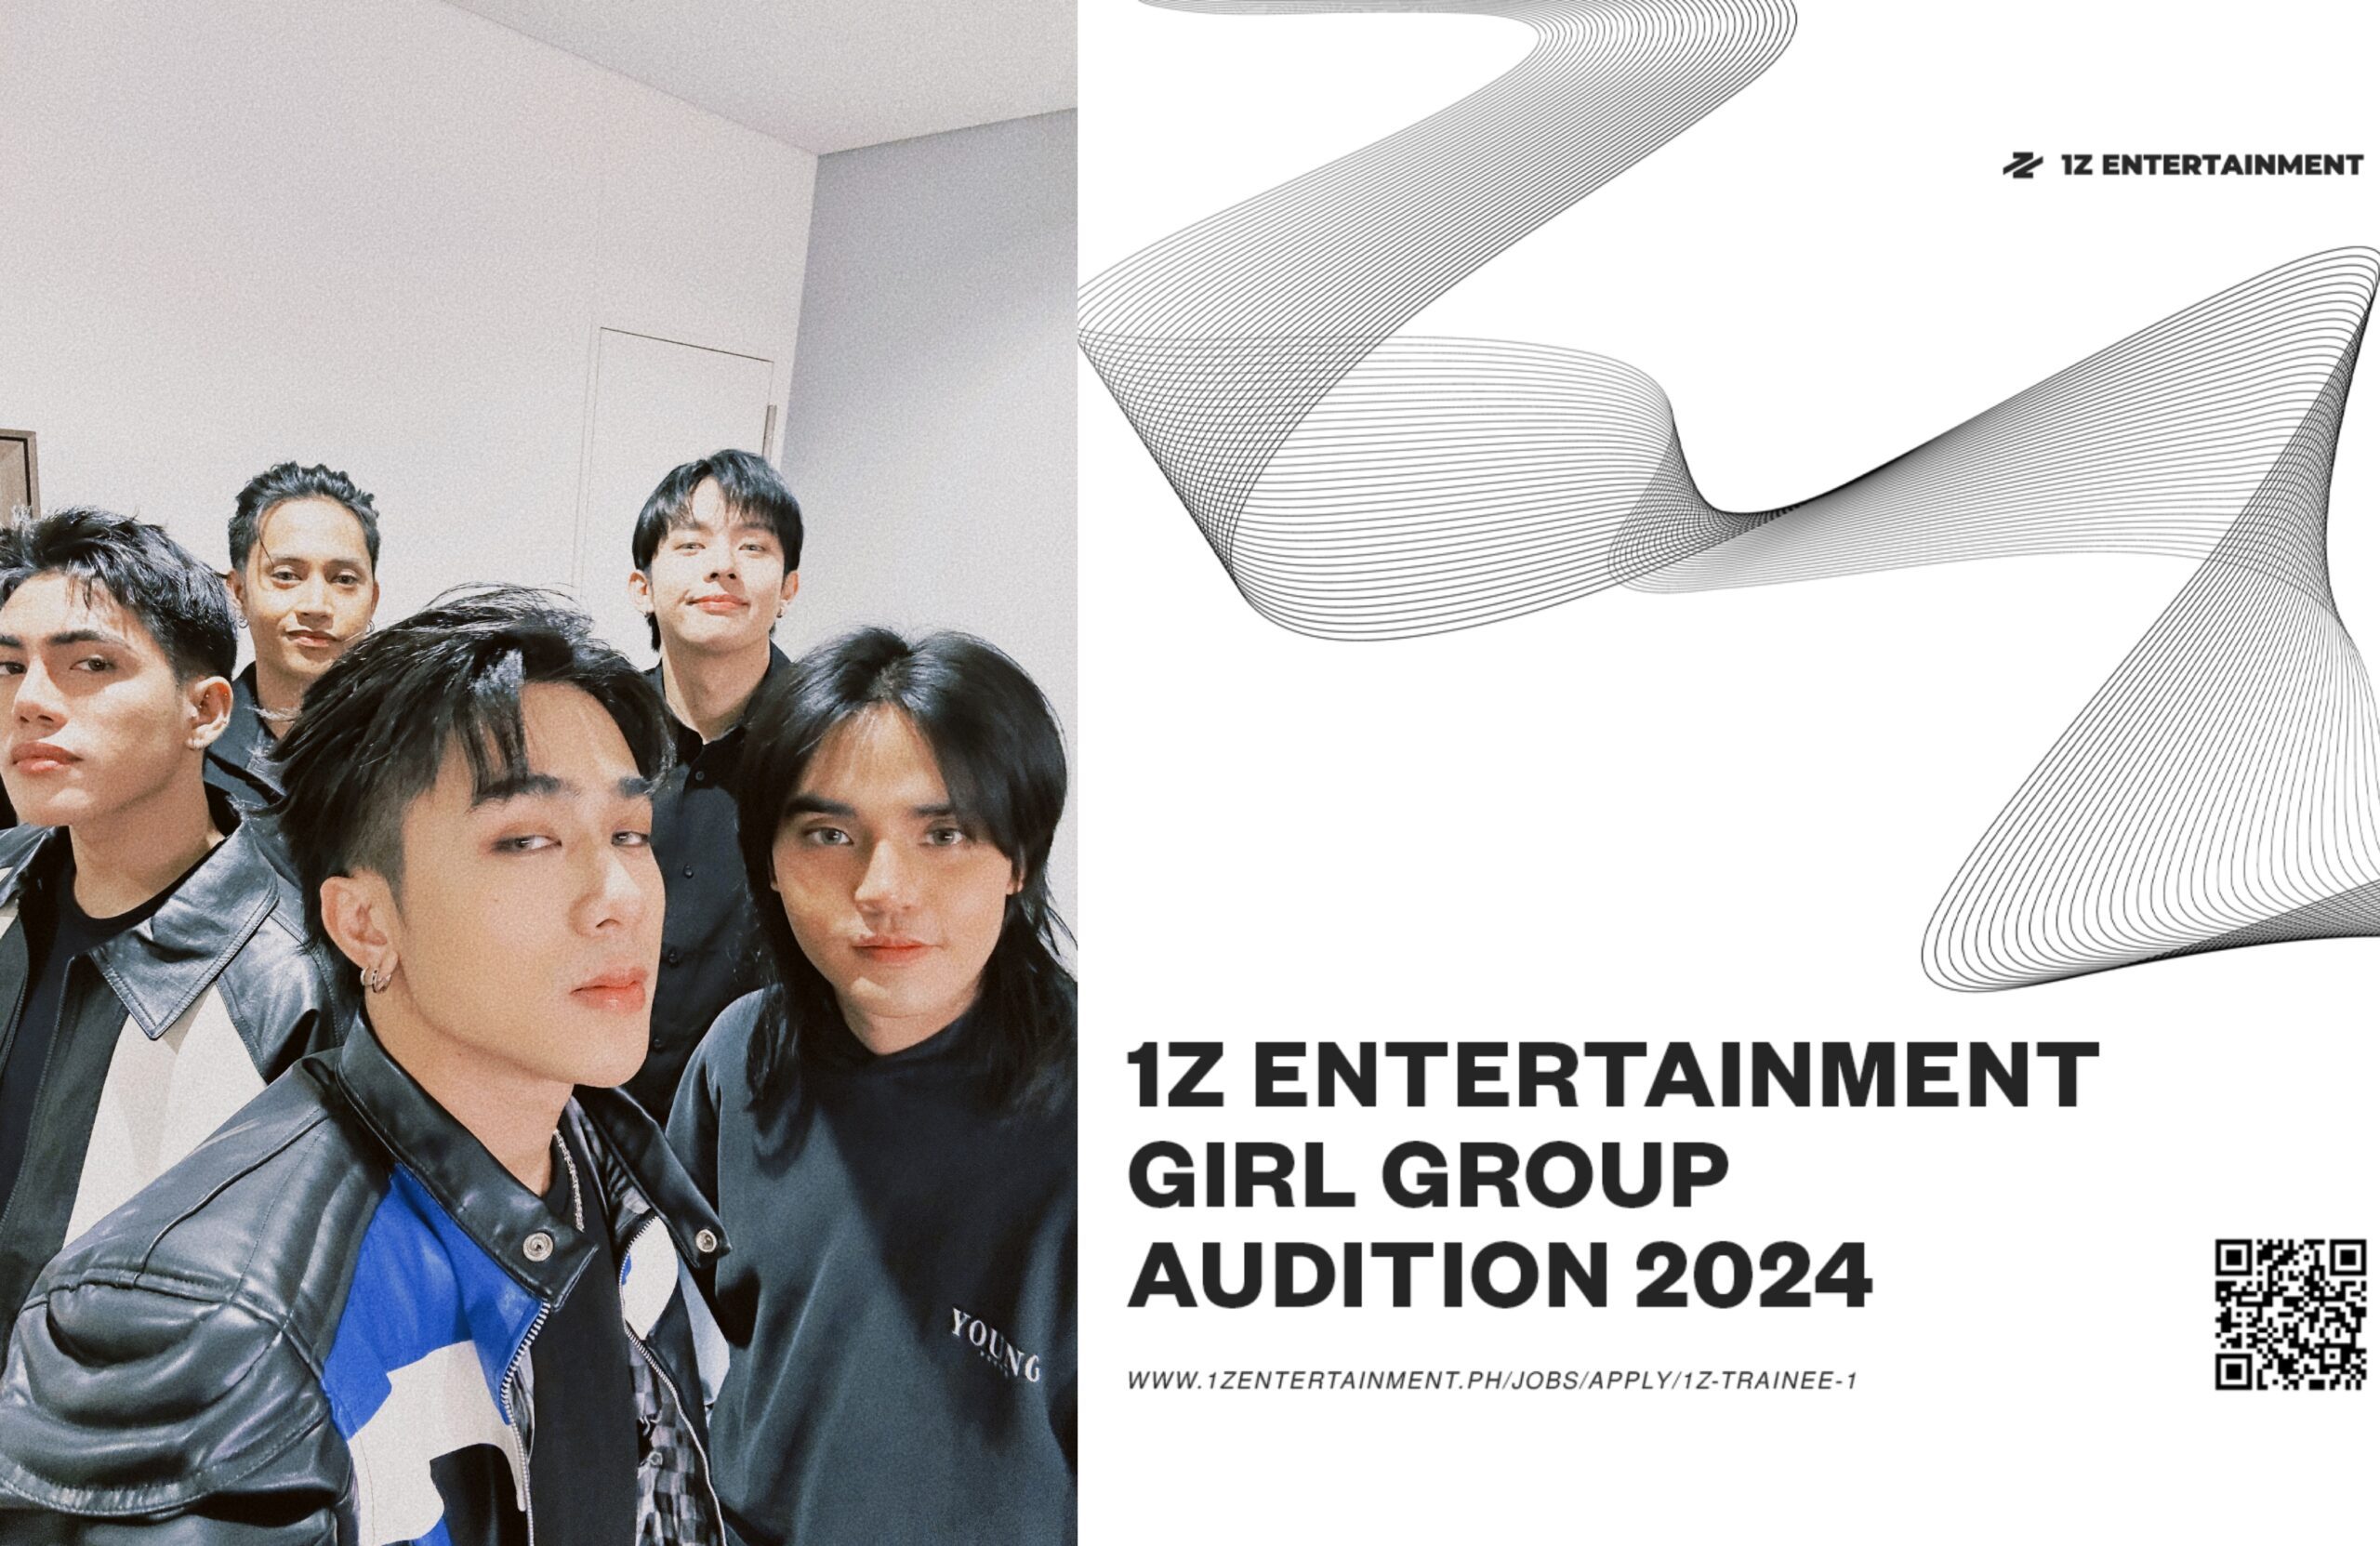 LOOK: SB19’s agency 1Z Entertainment opens audition for girl group